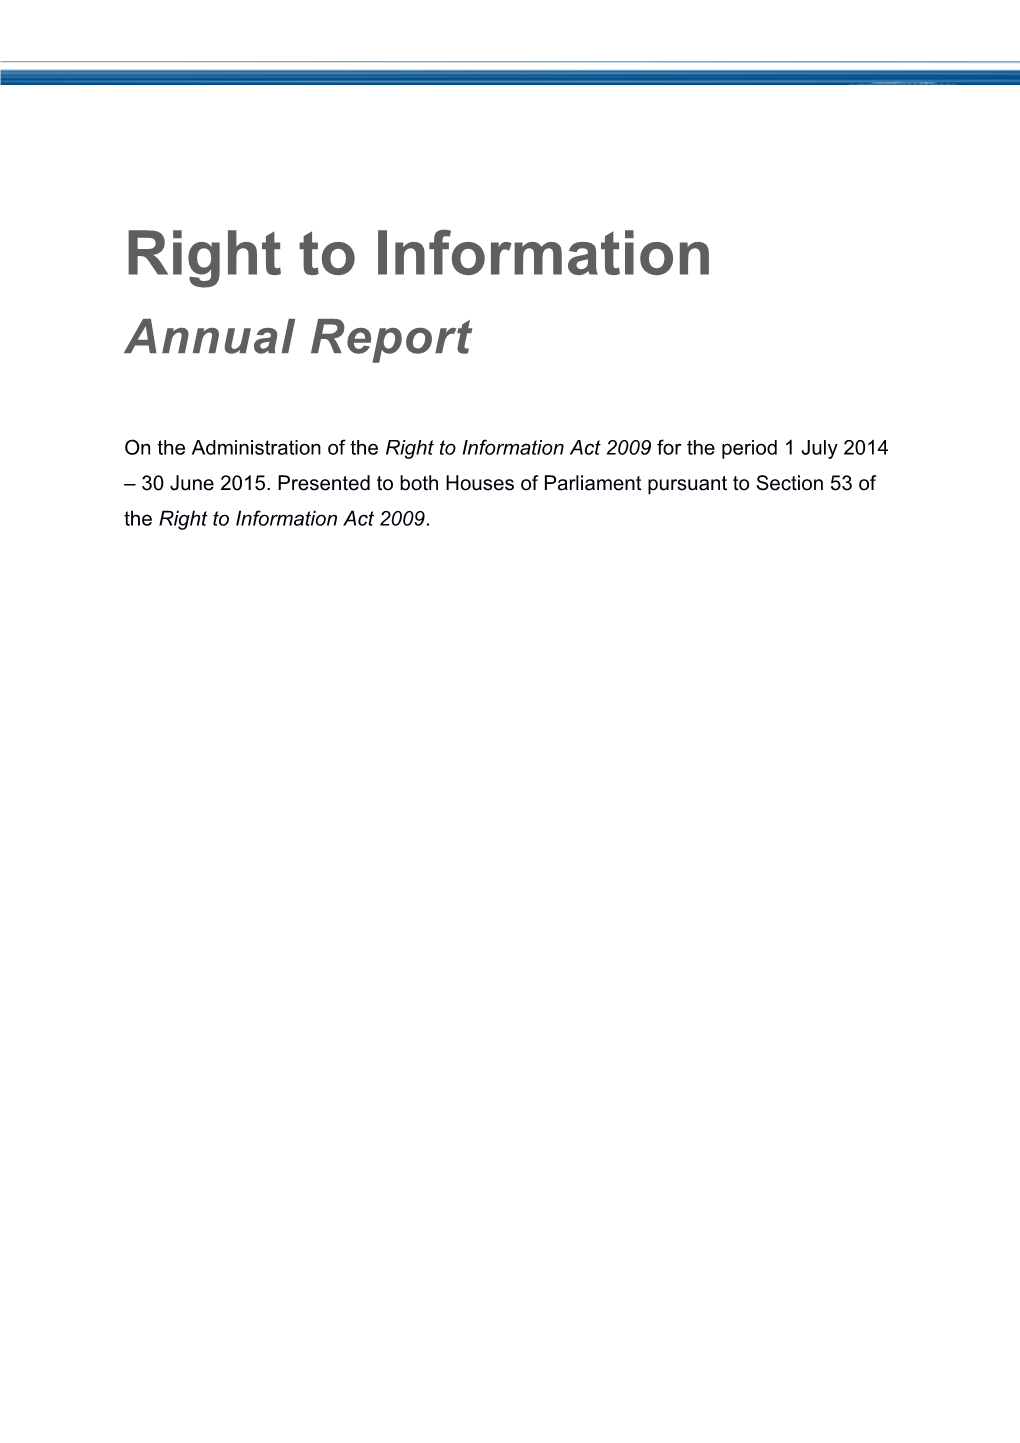 Right to Information Annual Report 2014 - 2015